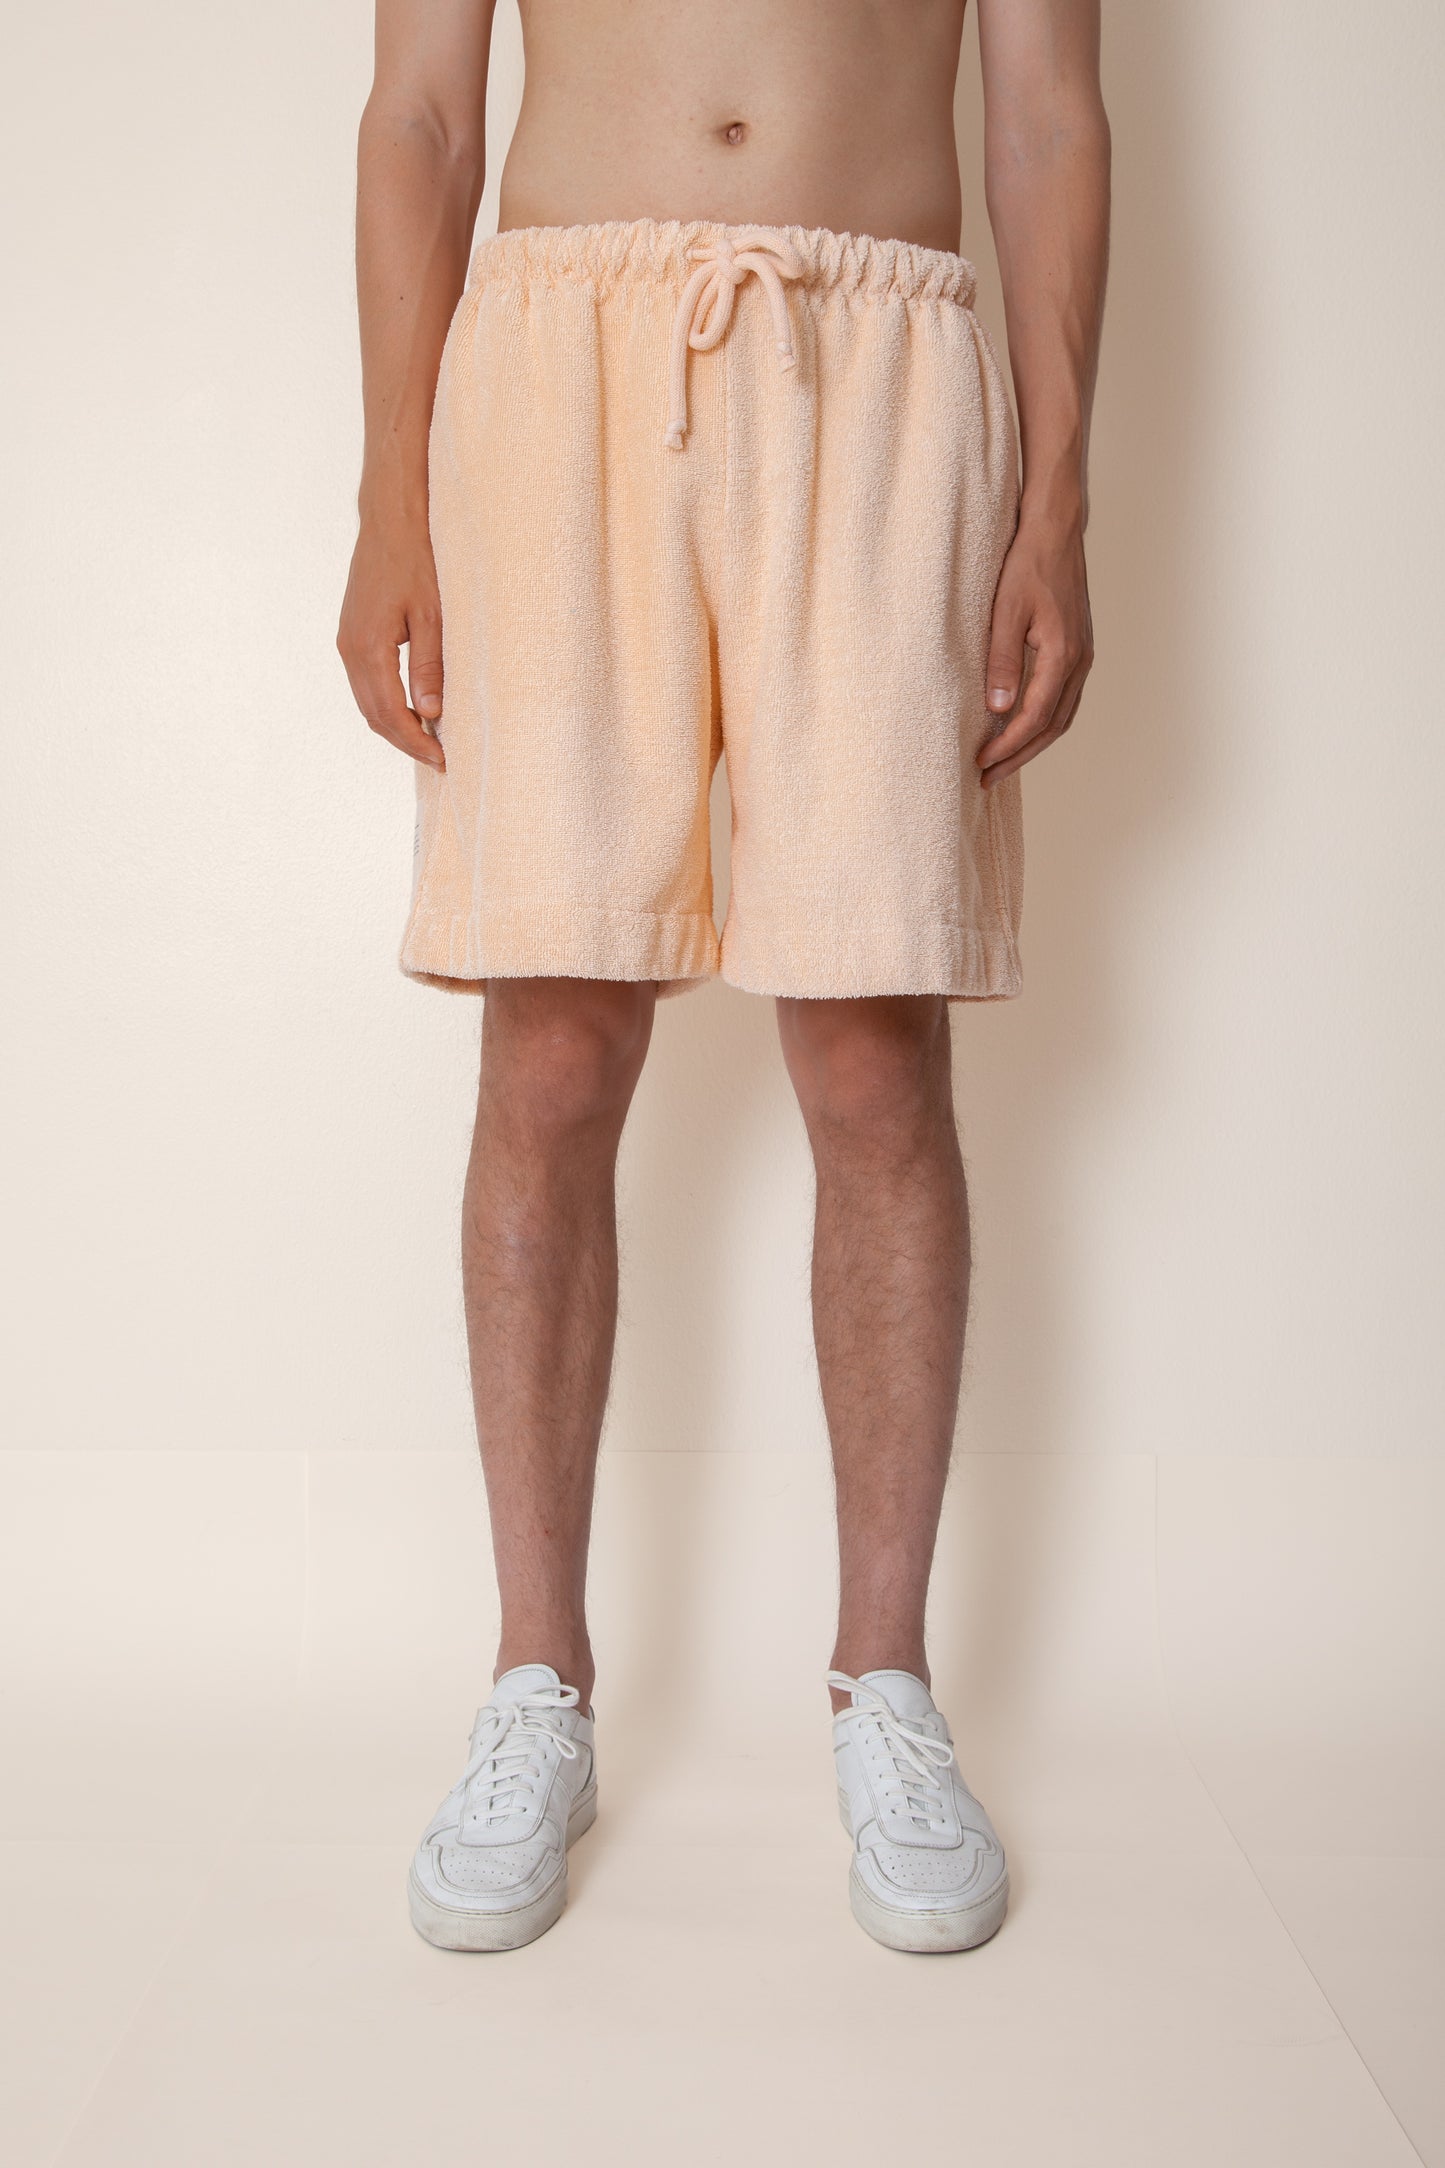 Unisex Terry Basketball Shorts in Peach